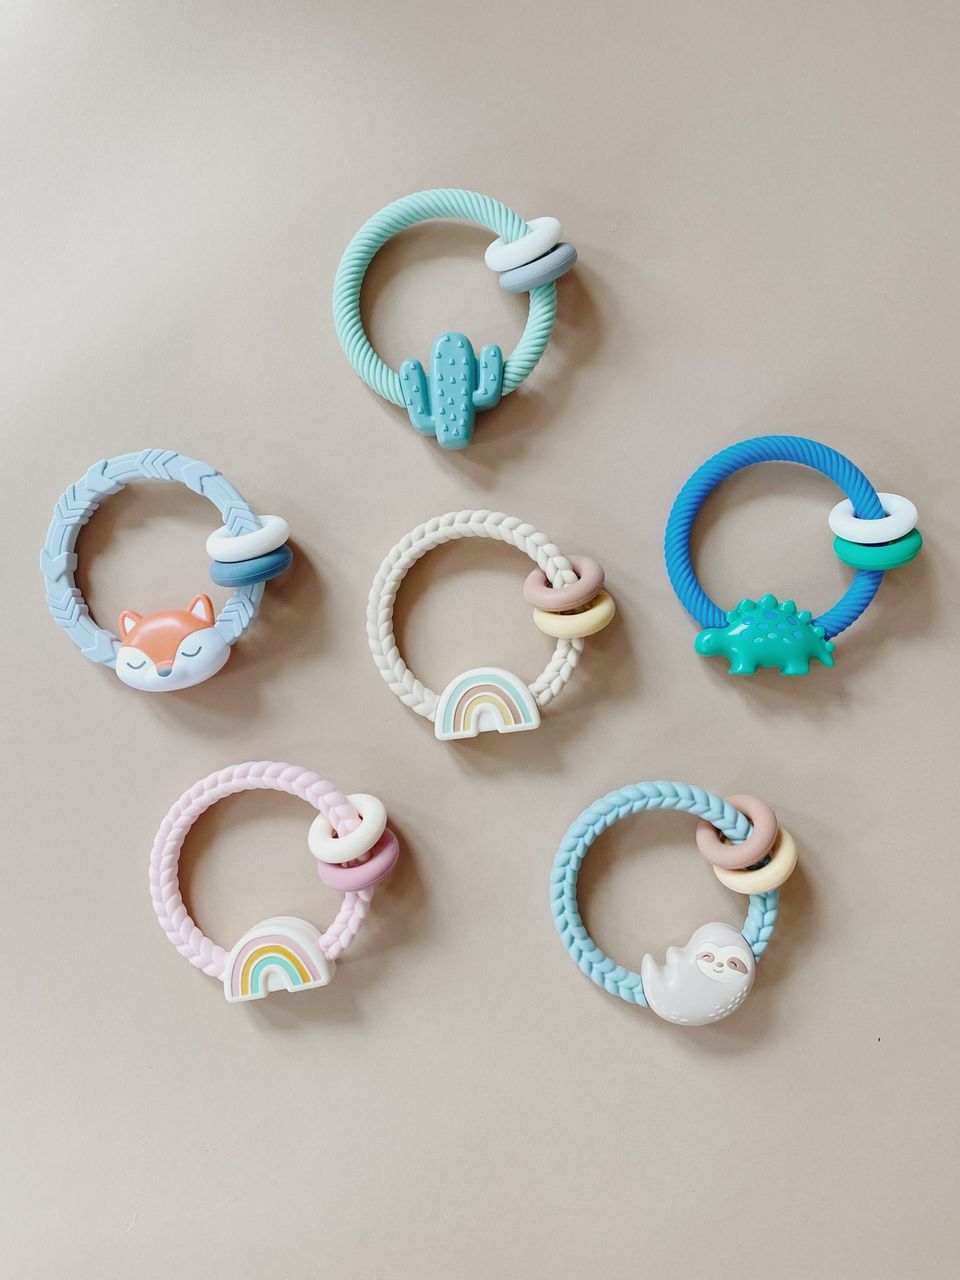 Itzy Ritzy Rattle Silicone Teether Rattles 固齒咬咬環 (Sloth)